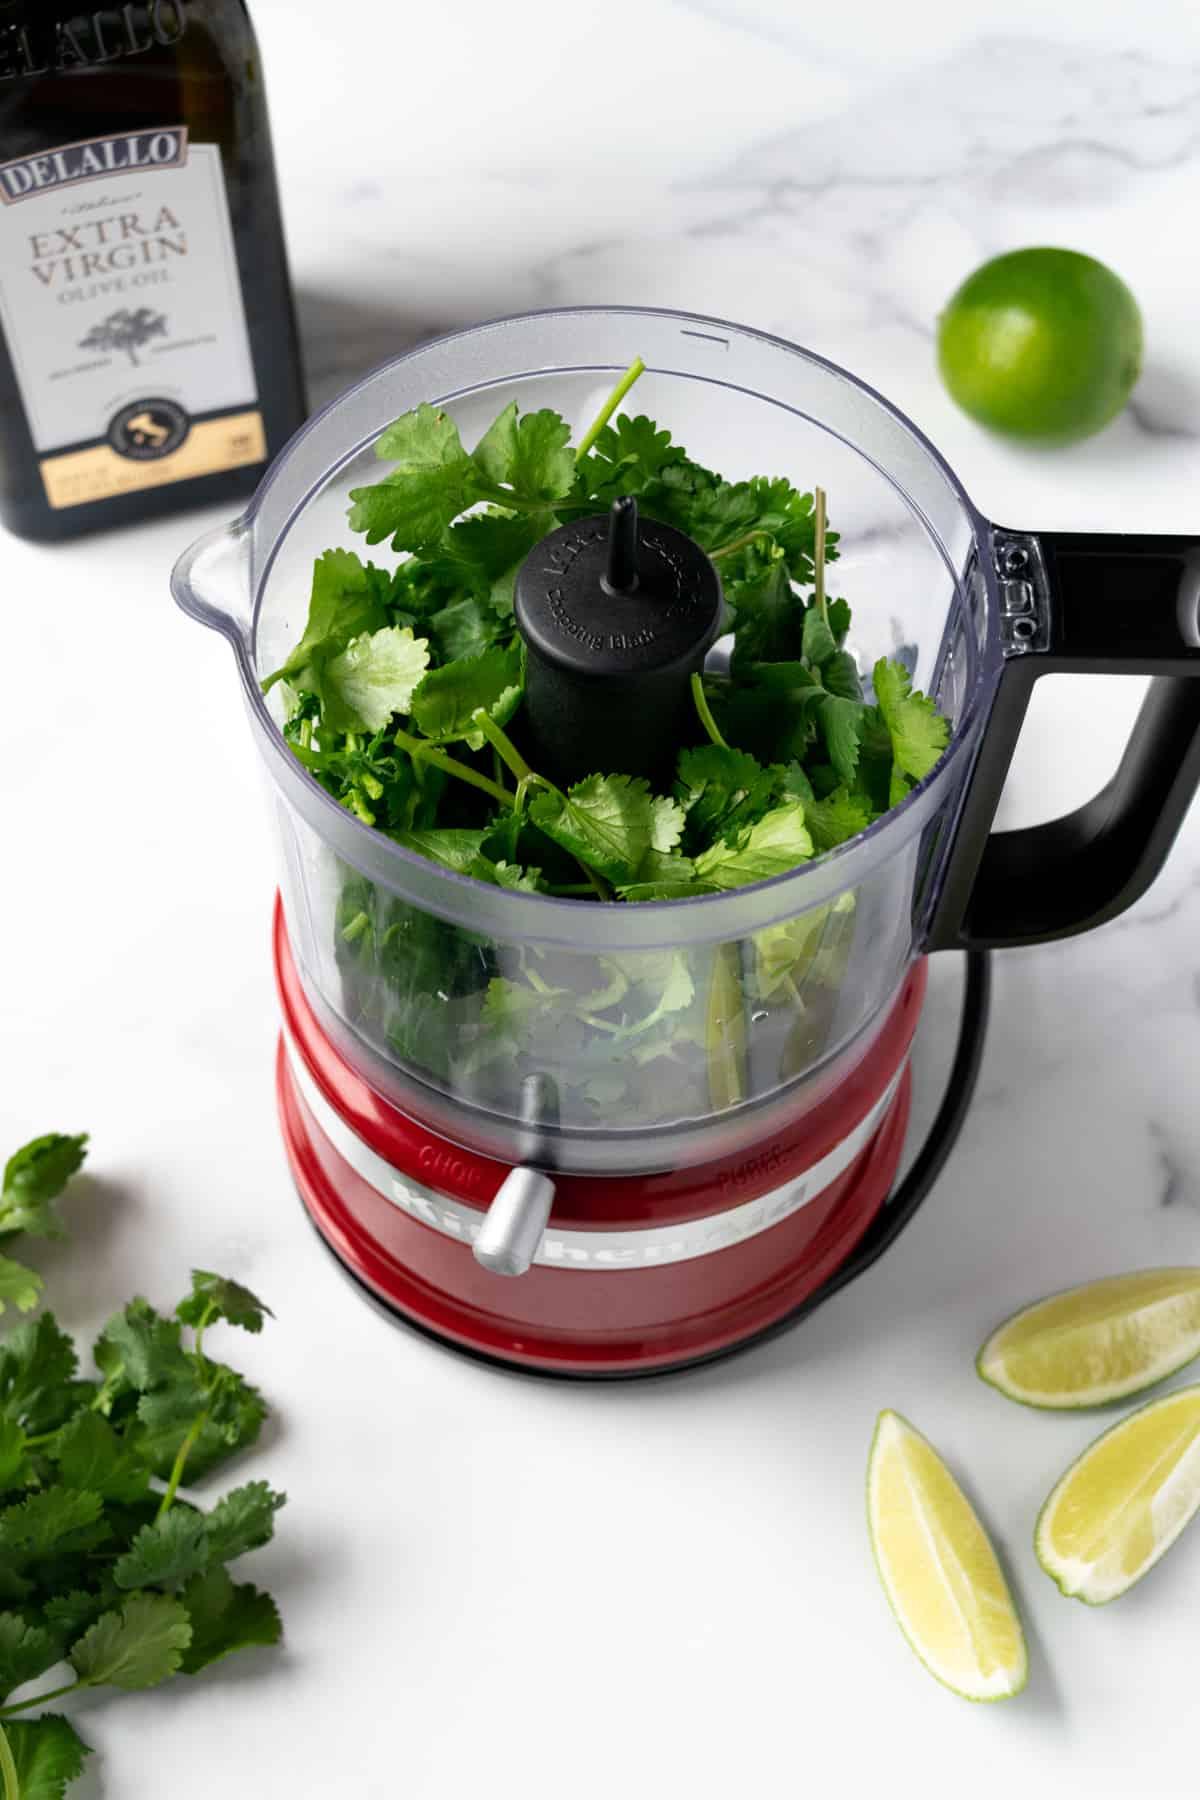 Cilantro in a small food processor on a table with limes and olive oil.